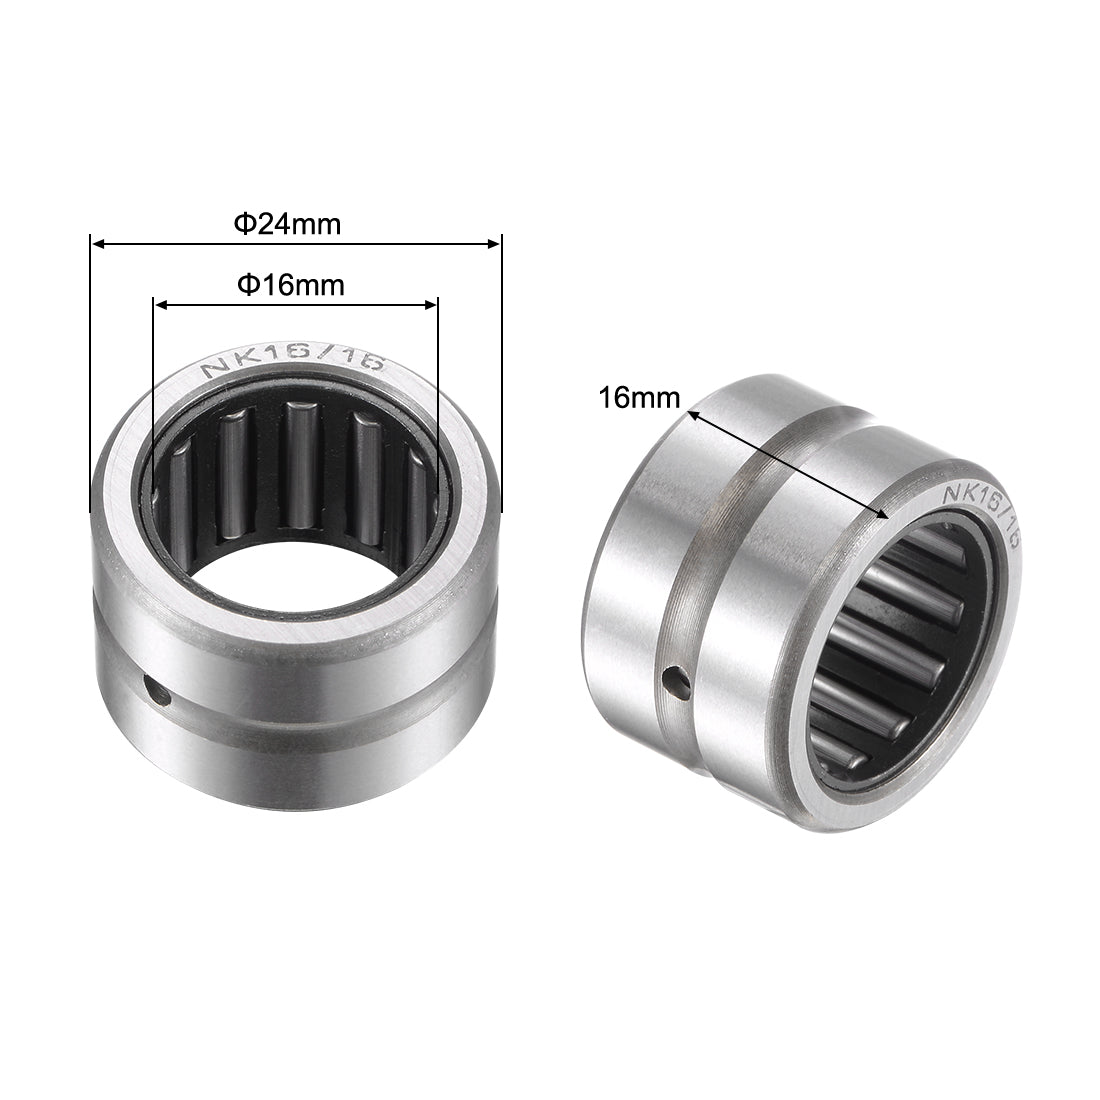 uxcell Uxcell NK16/16 Needle Roller Bearings 16mm x 24mm x 16mm Chrome Steel Open End 2pcs